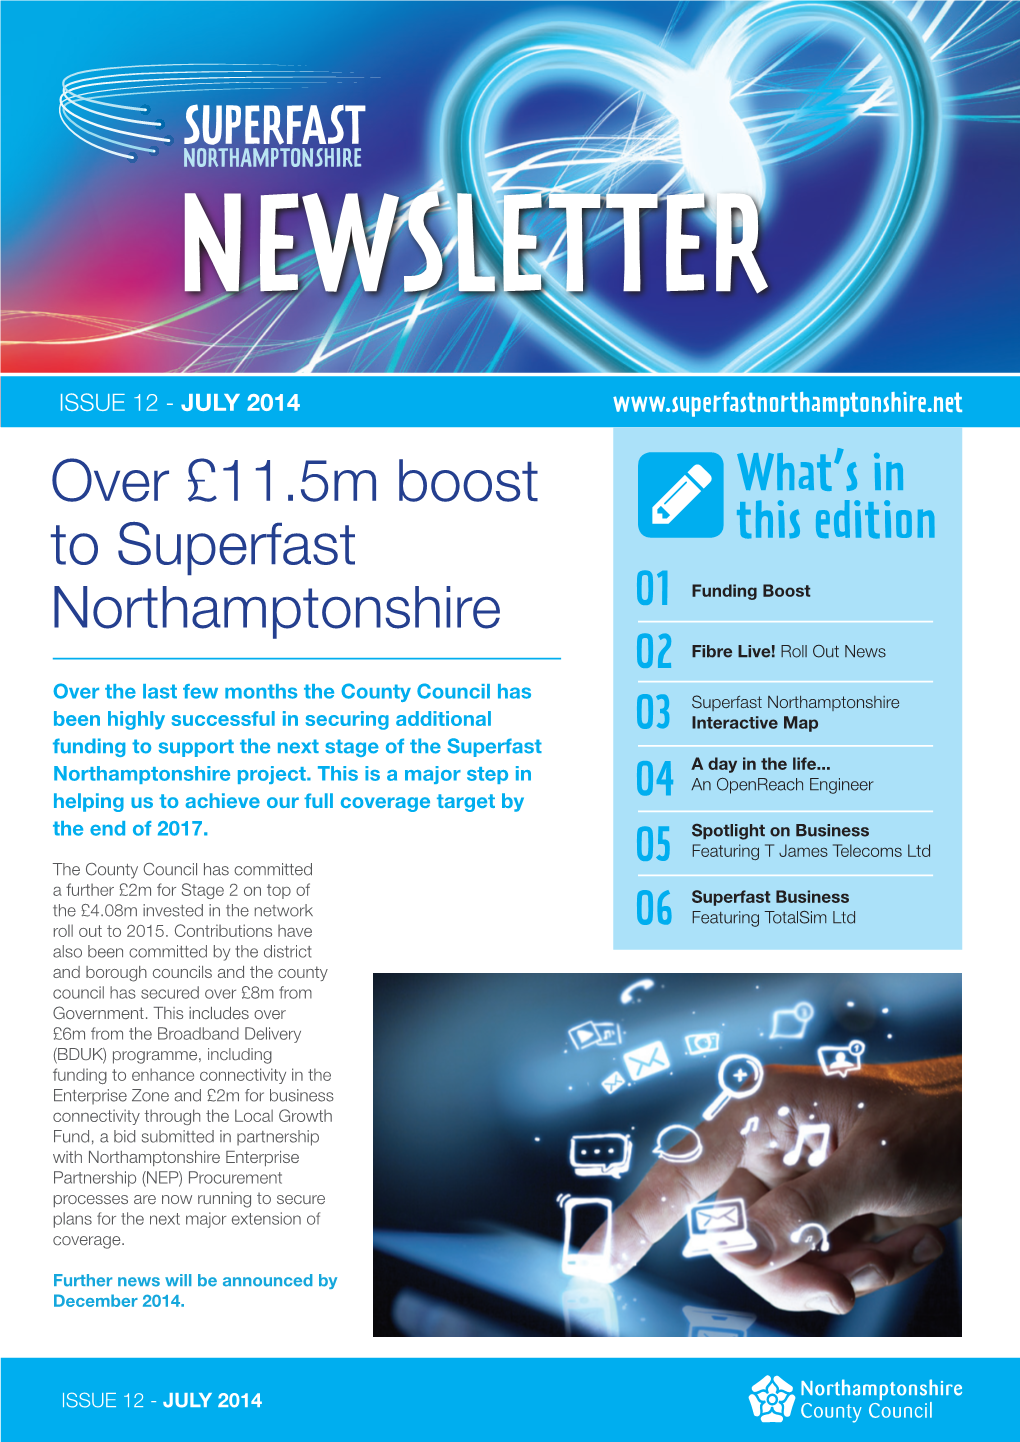 Over £11.5M Boost to Superfast Northamptonshire